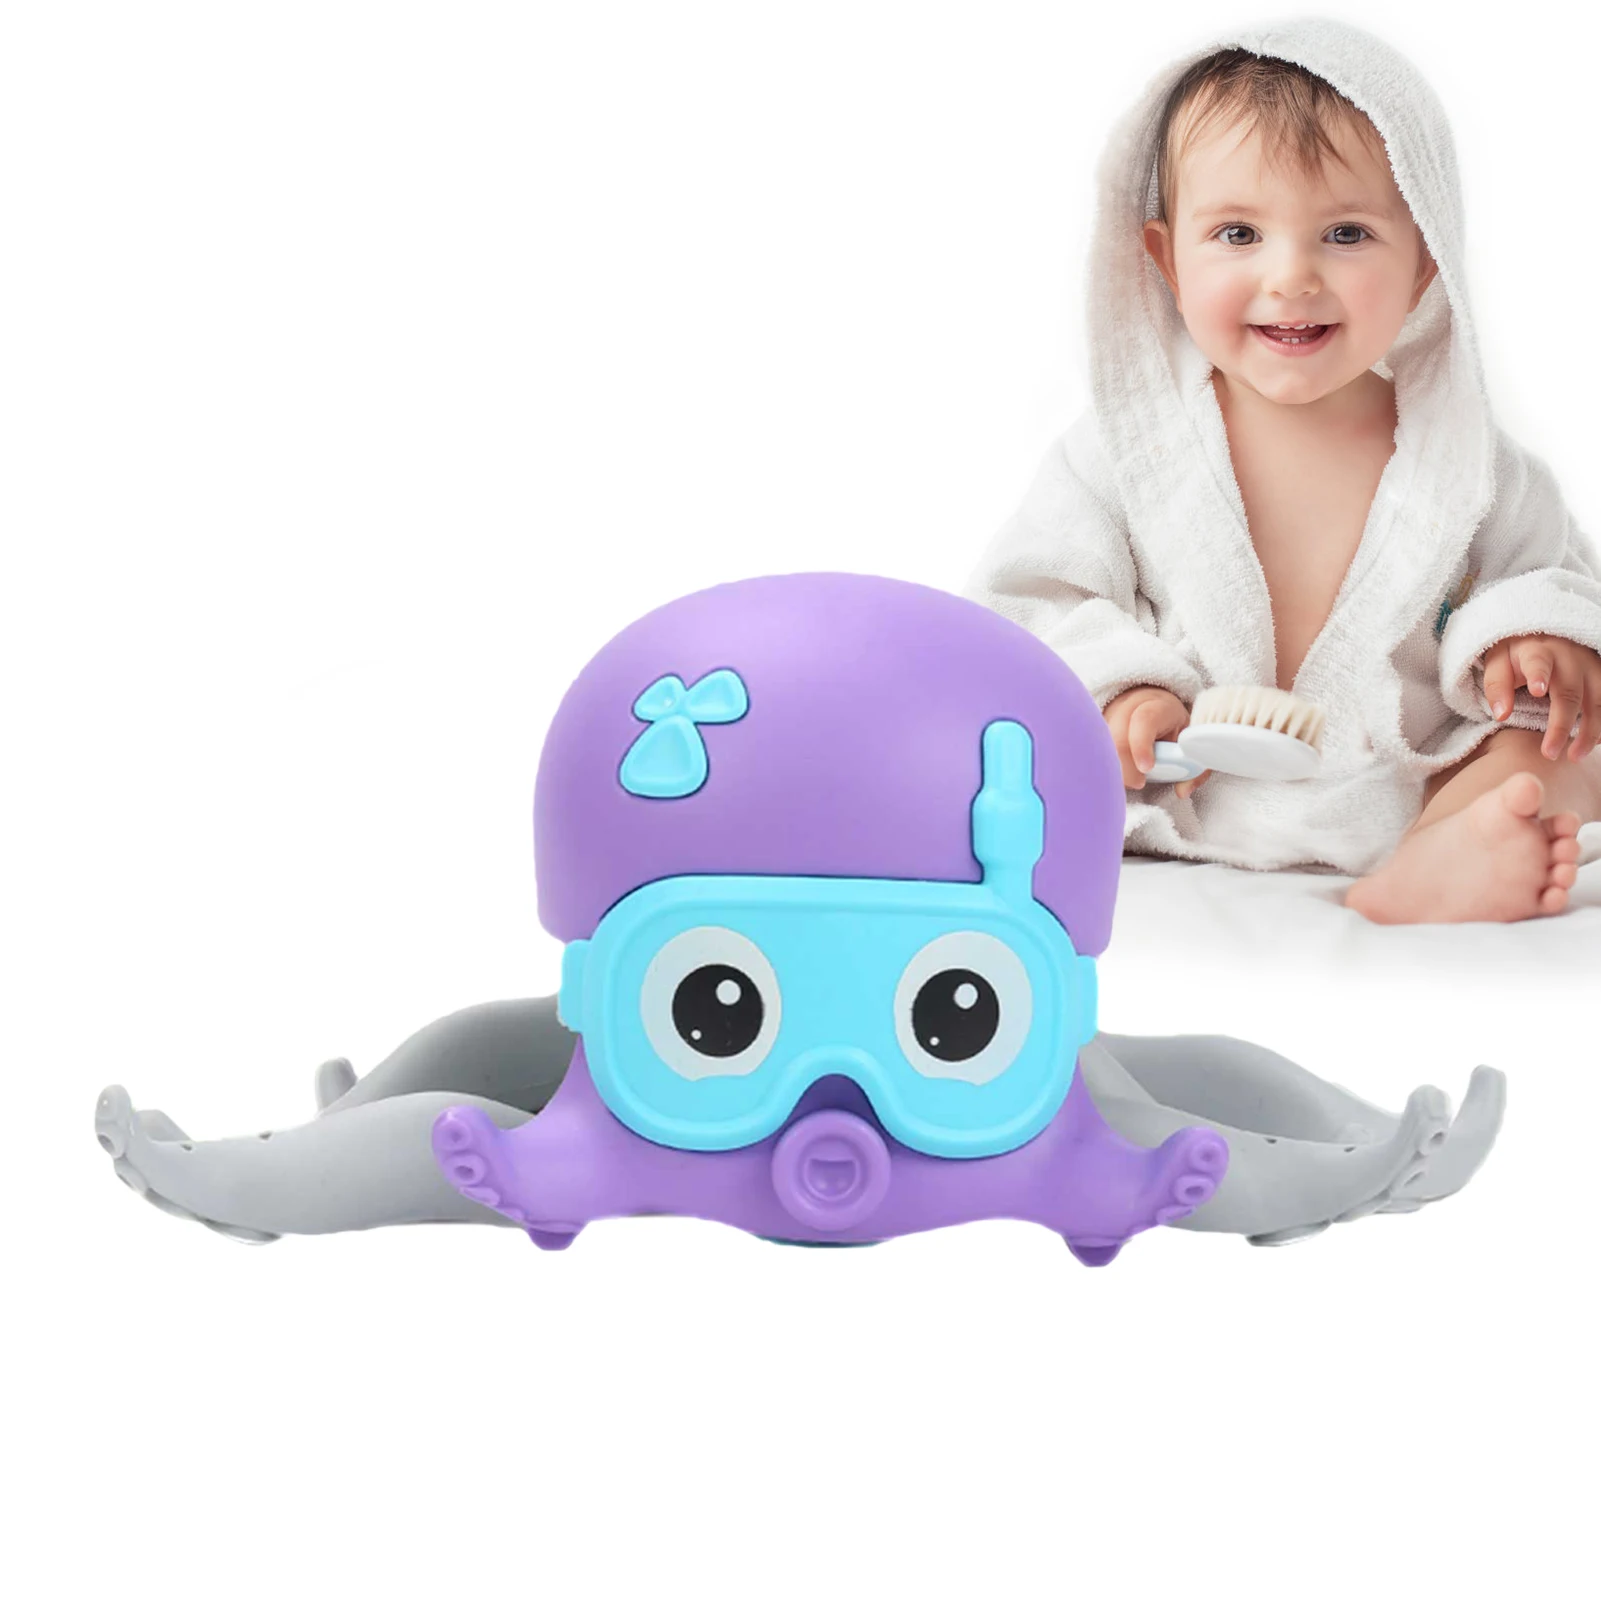 

Wind Up Bath ToyBaby Wind Up Bath Toy Octopus Bathtub Toys Walking Octopus Baby Bath Toys Clockwork Crawling Octopus Toy